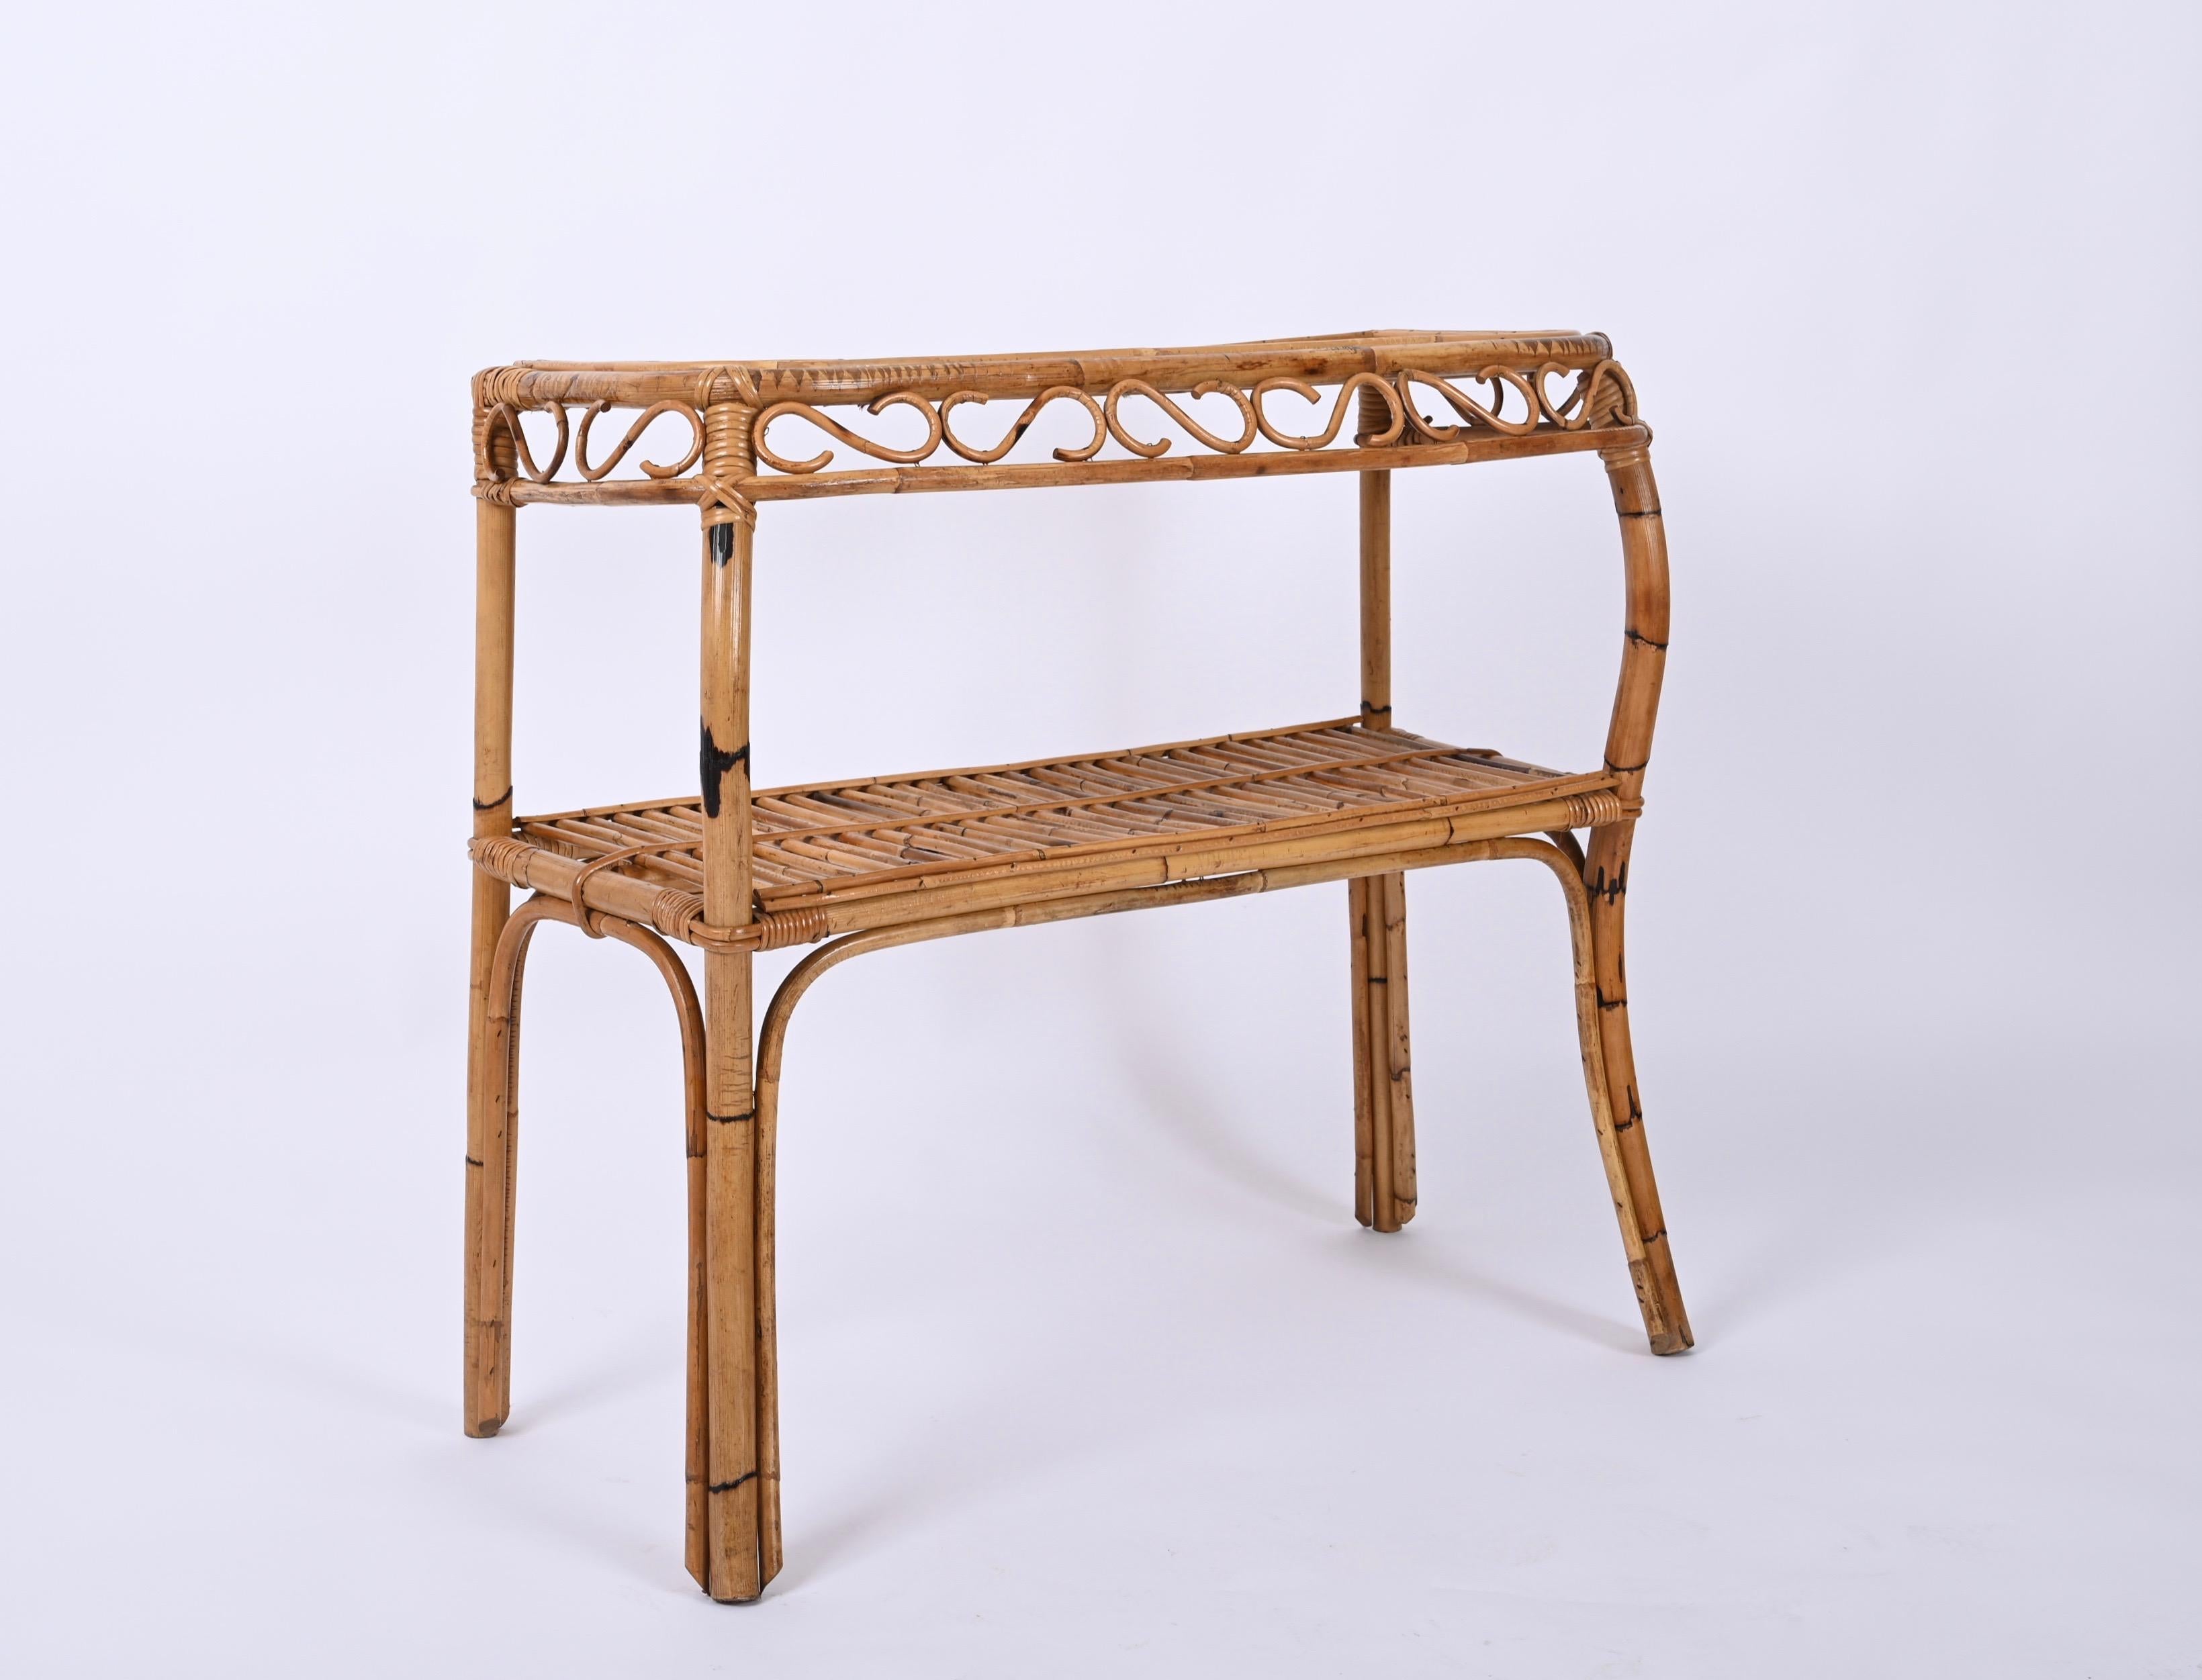 Italian Midcentury Bamboo and Rattan Console Table, Franco Albini, Italy, 1960s For Sale